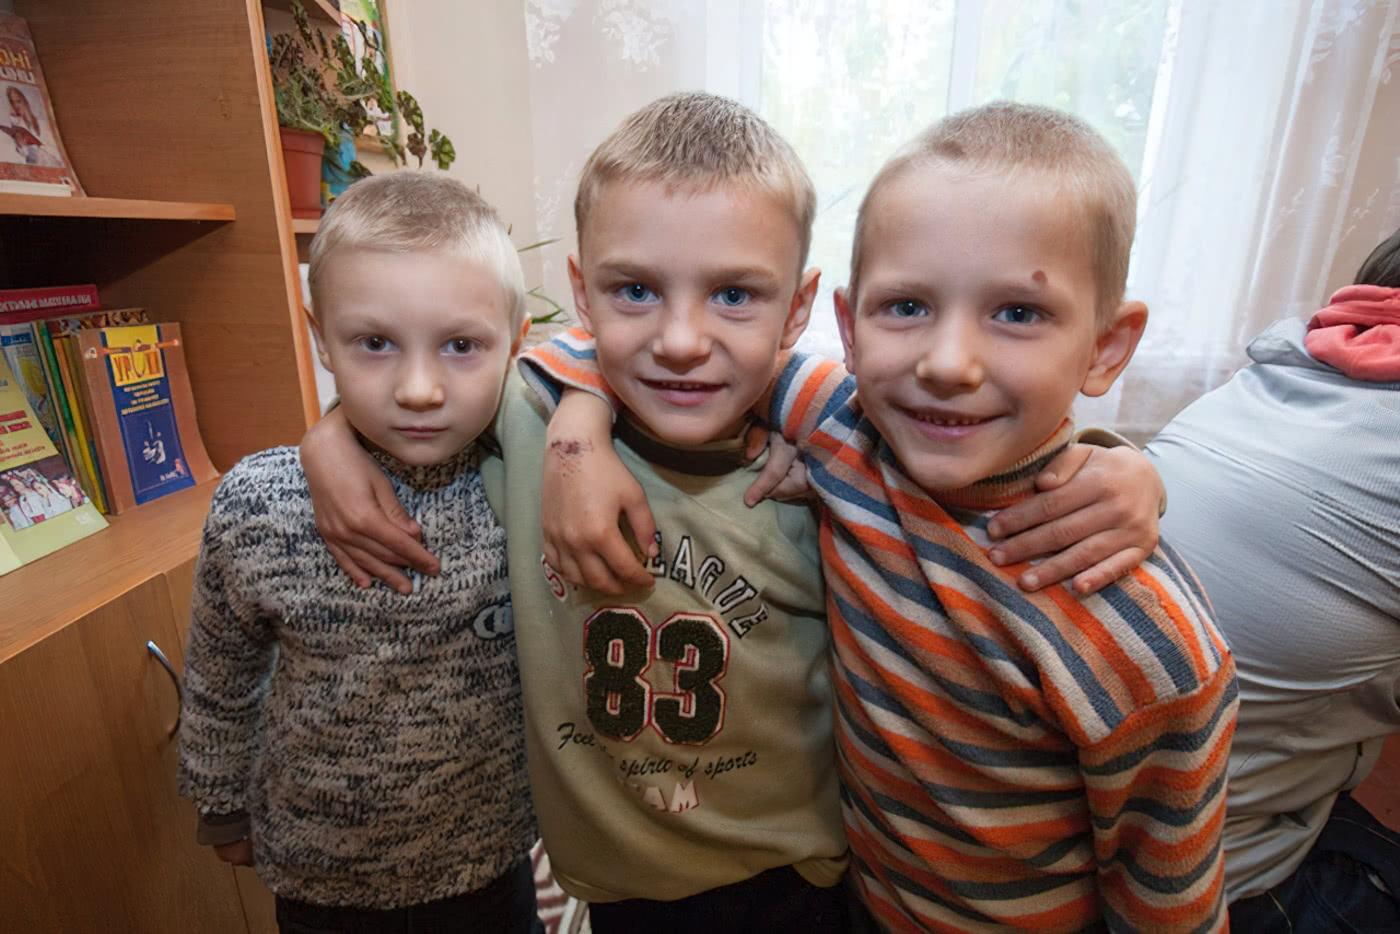 Thousands of orphans across Russia, Ukraine and the former Soviet countries are highly vulnerable to recruitment by organized crime groups.